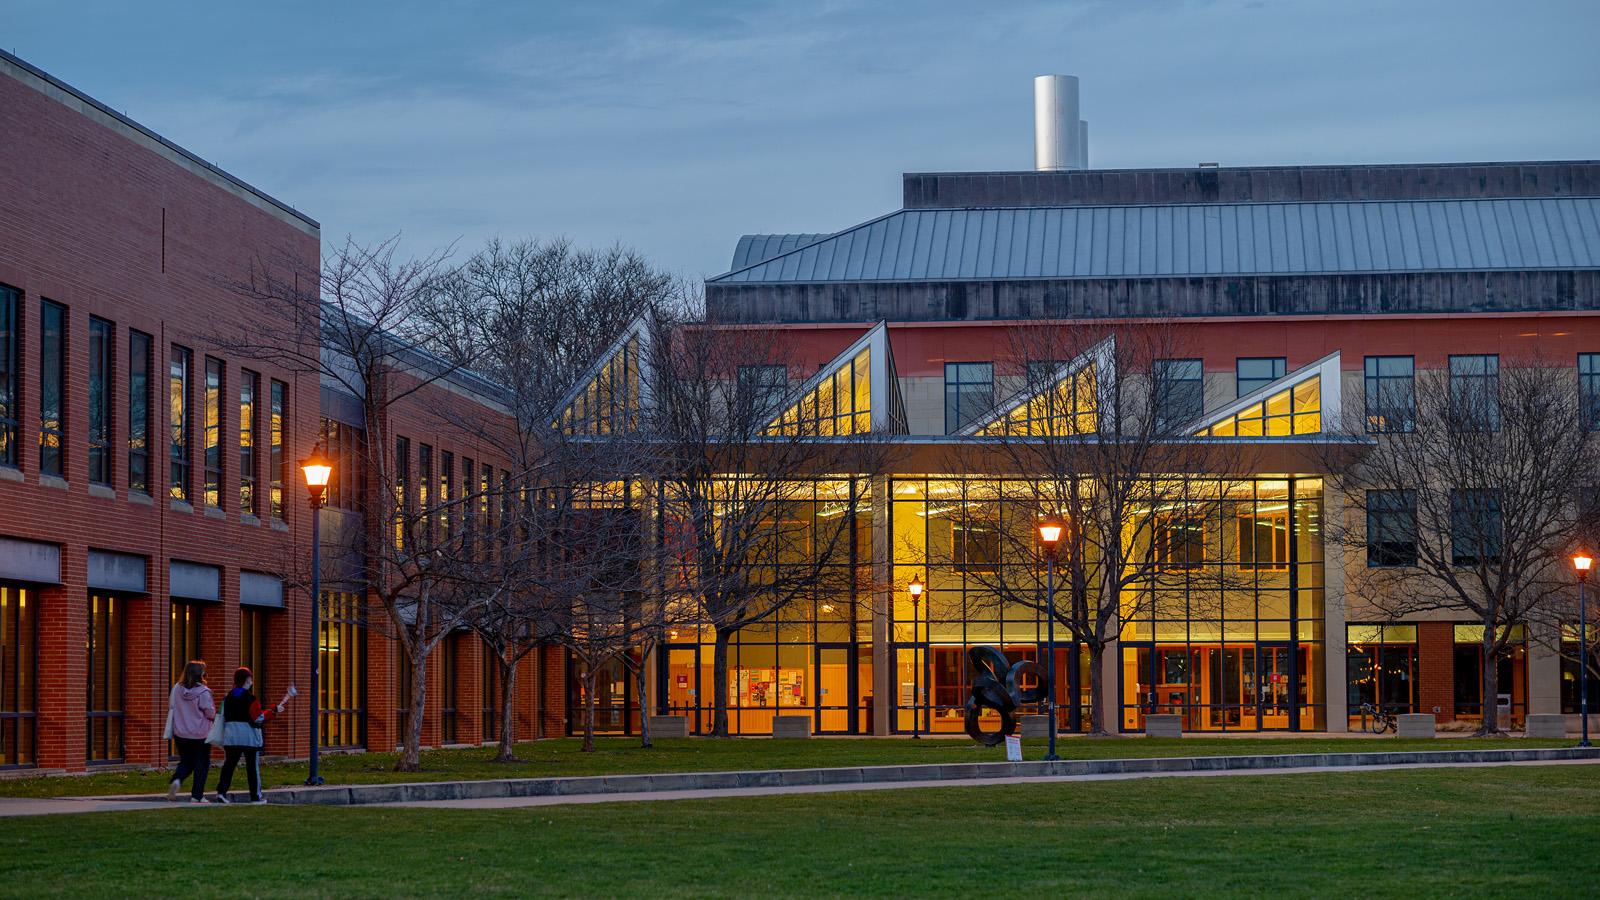 The science center at dusk